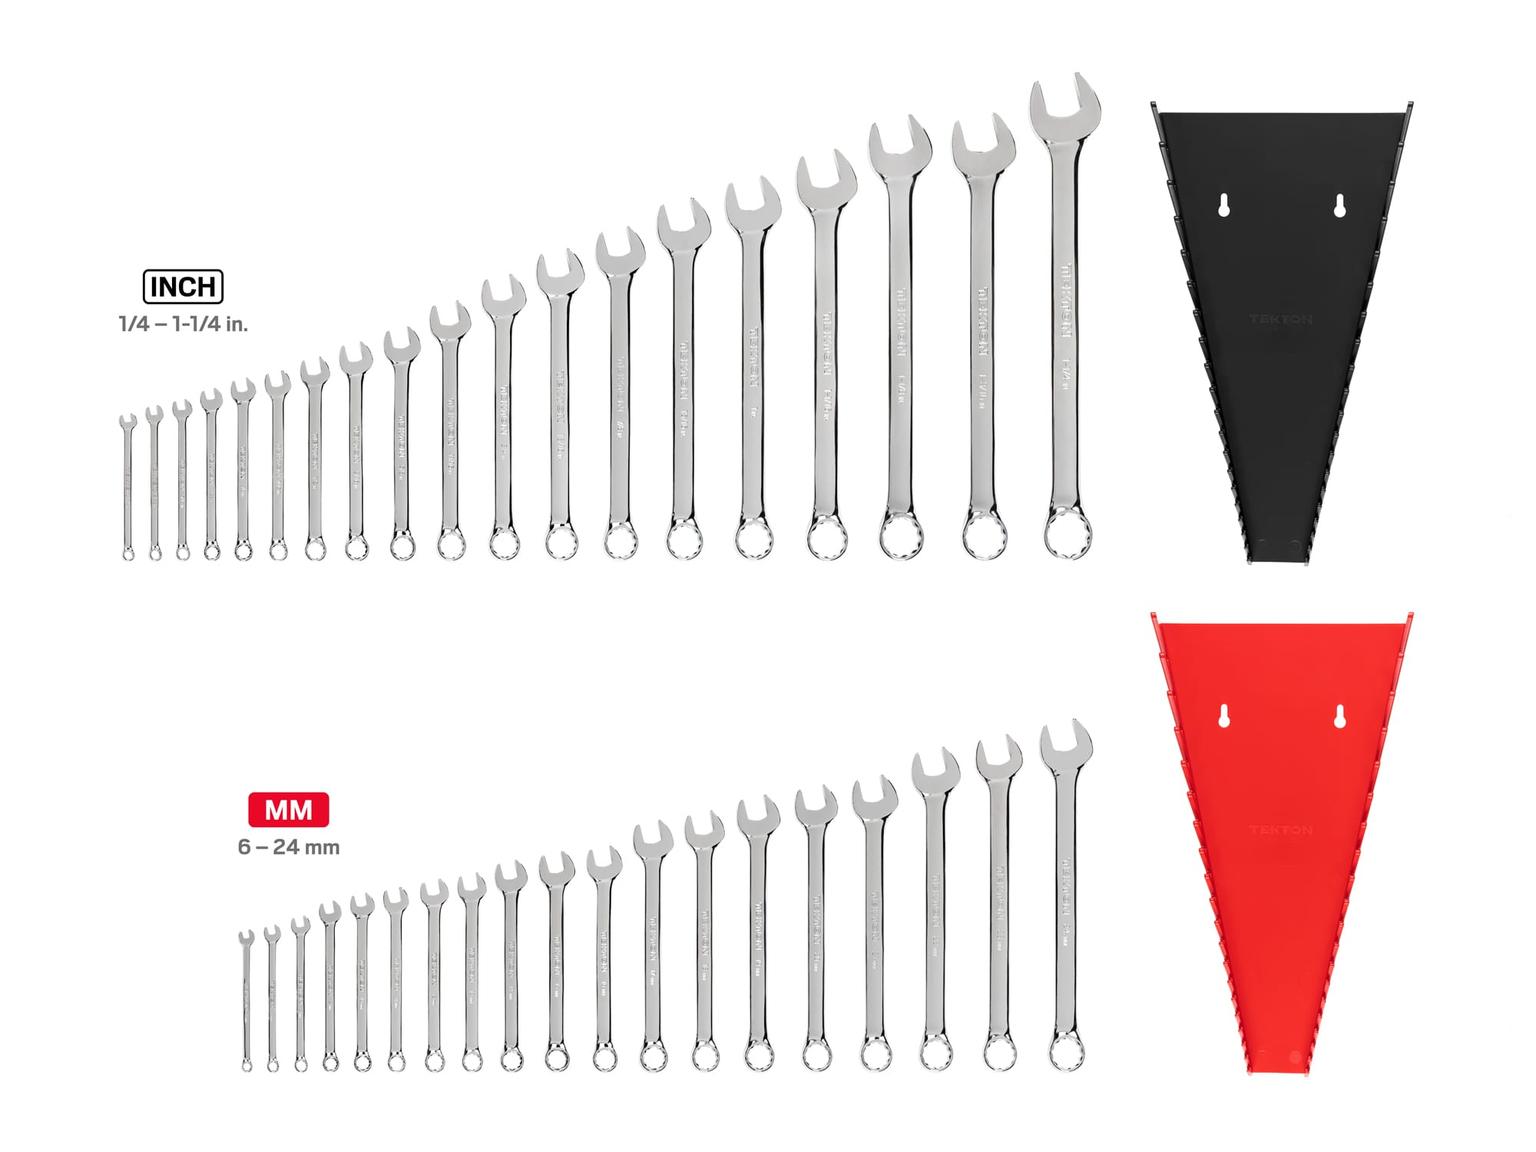 TEKTON WCB91302-T Combination Wrench Set with Rack, 38-Piece (1/4 - 1-1/4 in., 6 - 24 mm)